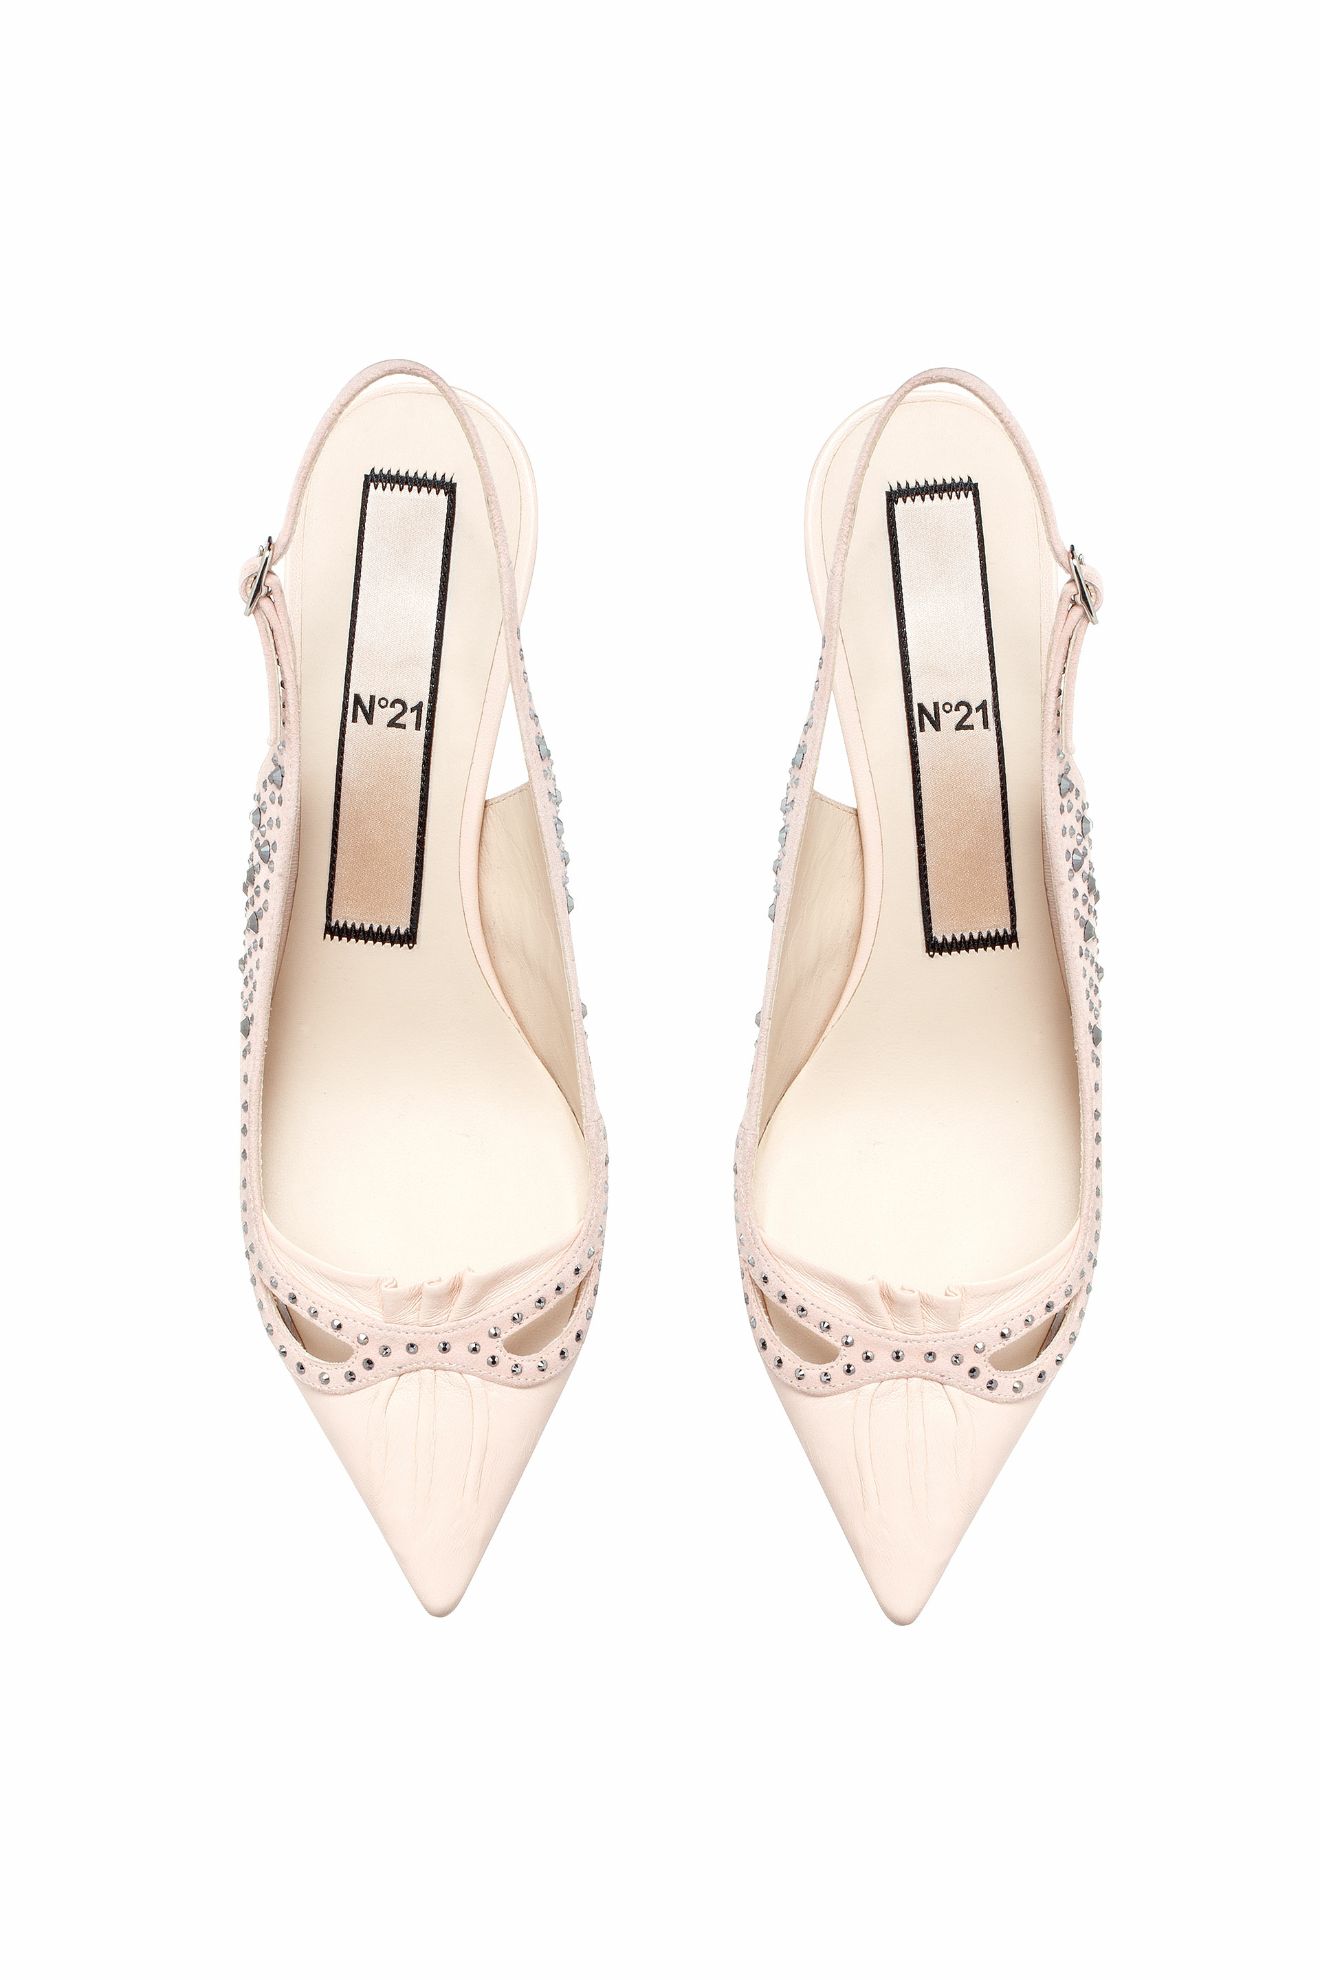 Studded slingbacks in neutrals | N°21 | Official Online Store